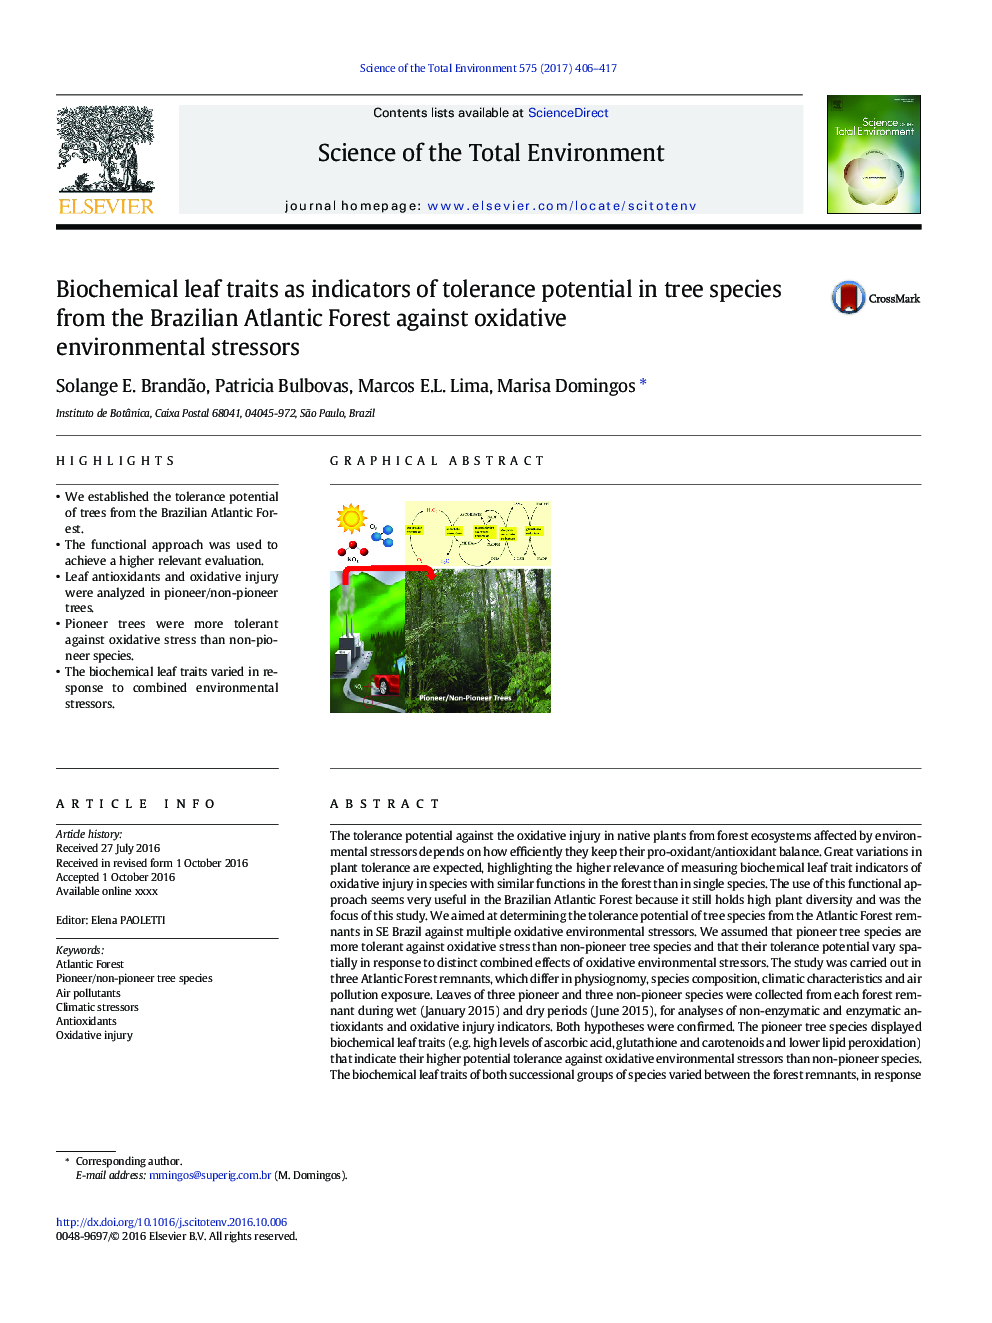 Biochemical leaf traits as indicators of tolerance potential in tree species from the Brazilian Atlantic Forest against oxidative environmental stressors